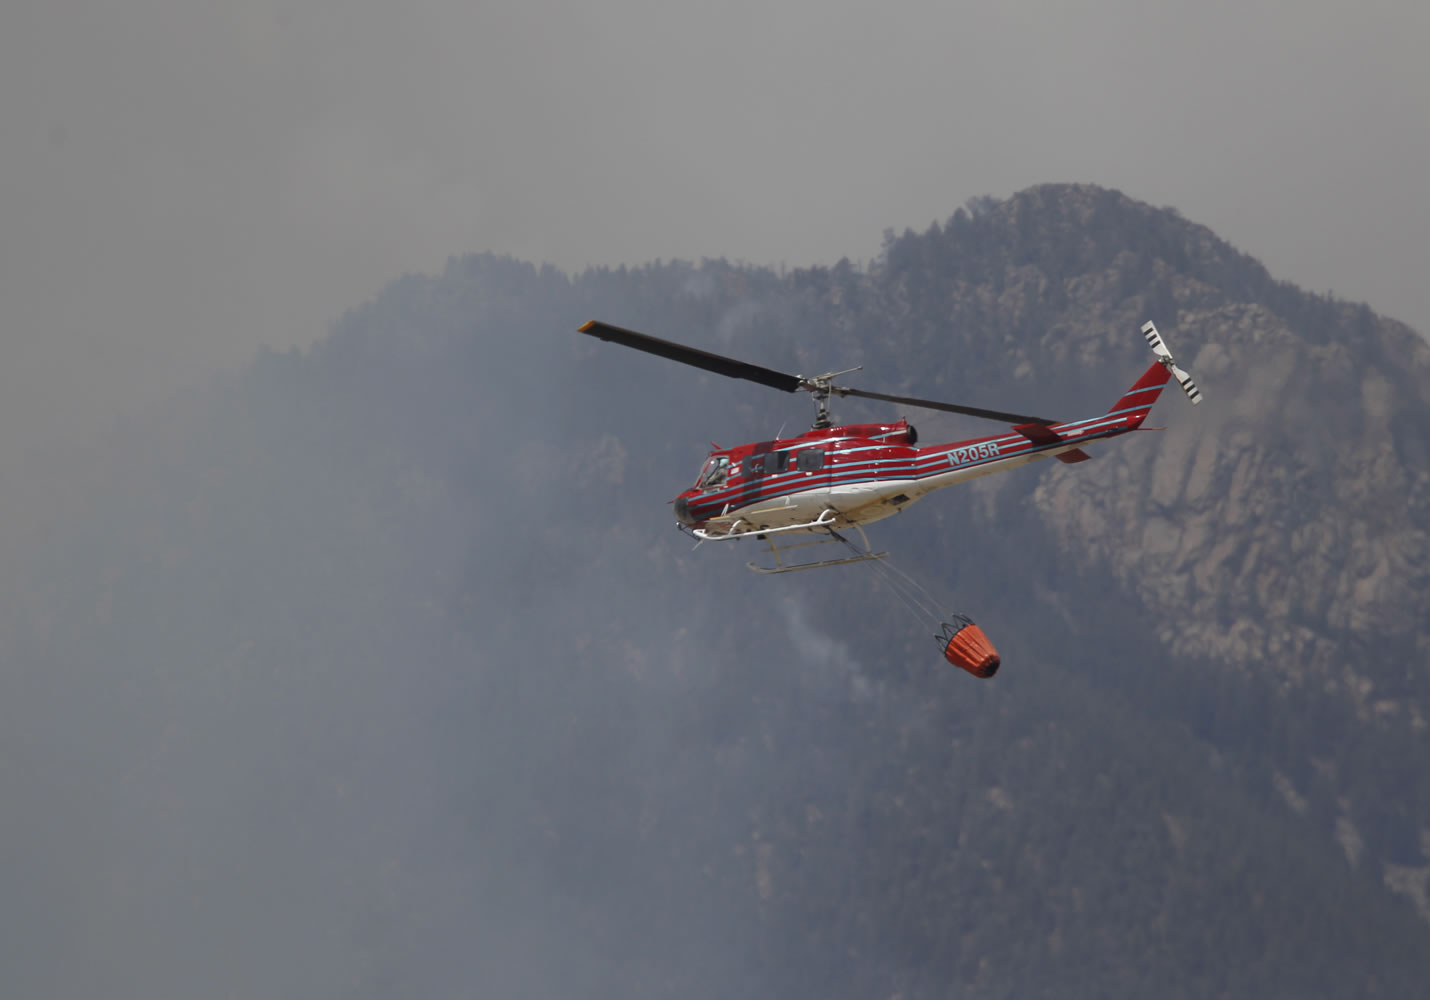 Bucket in tow, a helicopter makes a run as a wildfire rolls through housing subdivisions in the mountains north and west of Colorado Springs, Colo., on Wednesday, June 27, 2012. The fire has forced the evacuation of more than 32,000 residents of the communities west of and now in Colorado Springs proper.